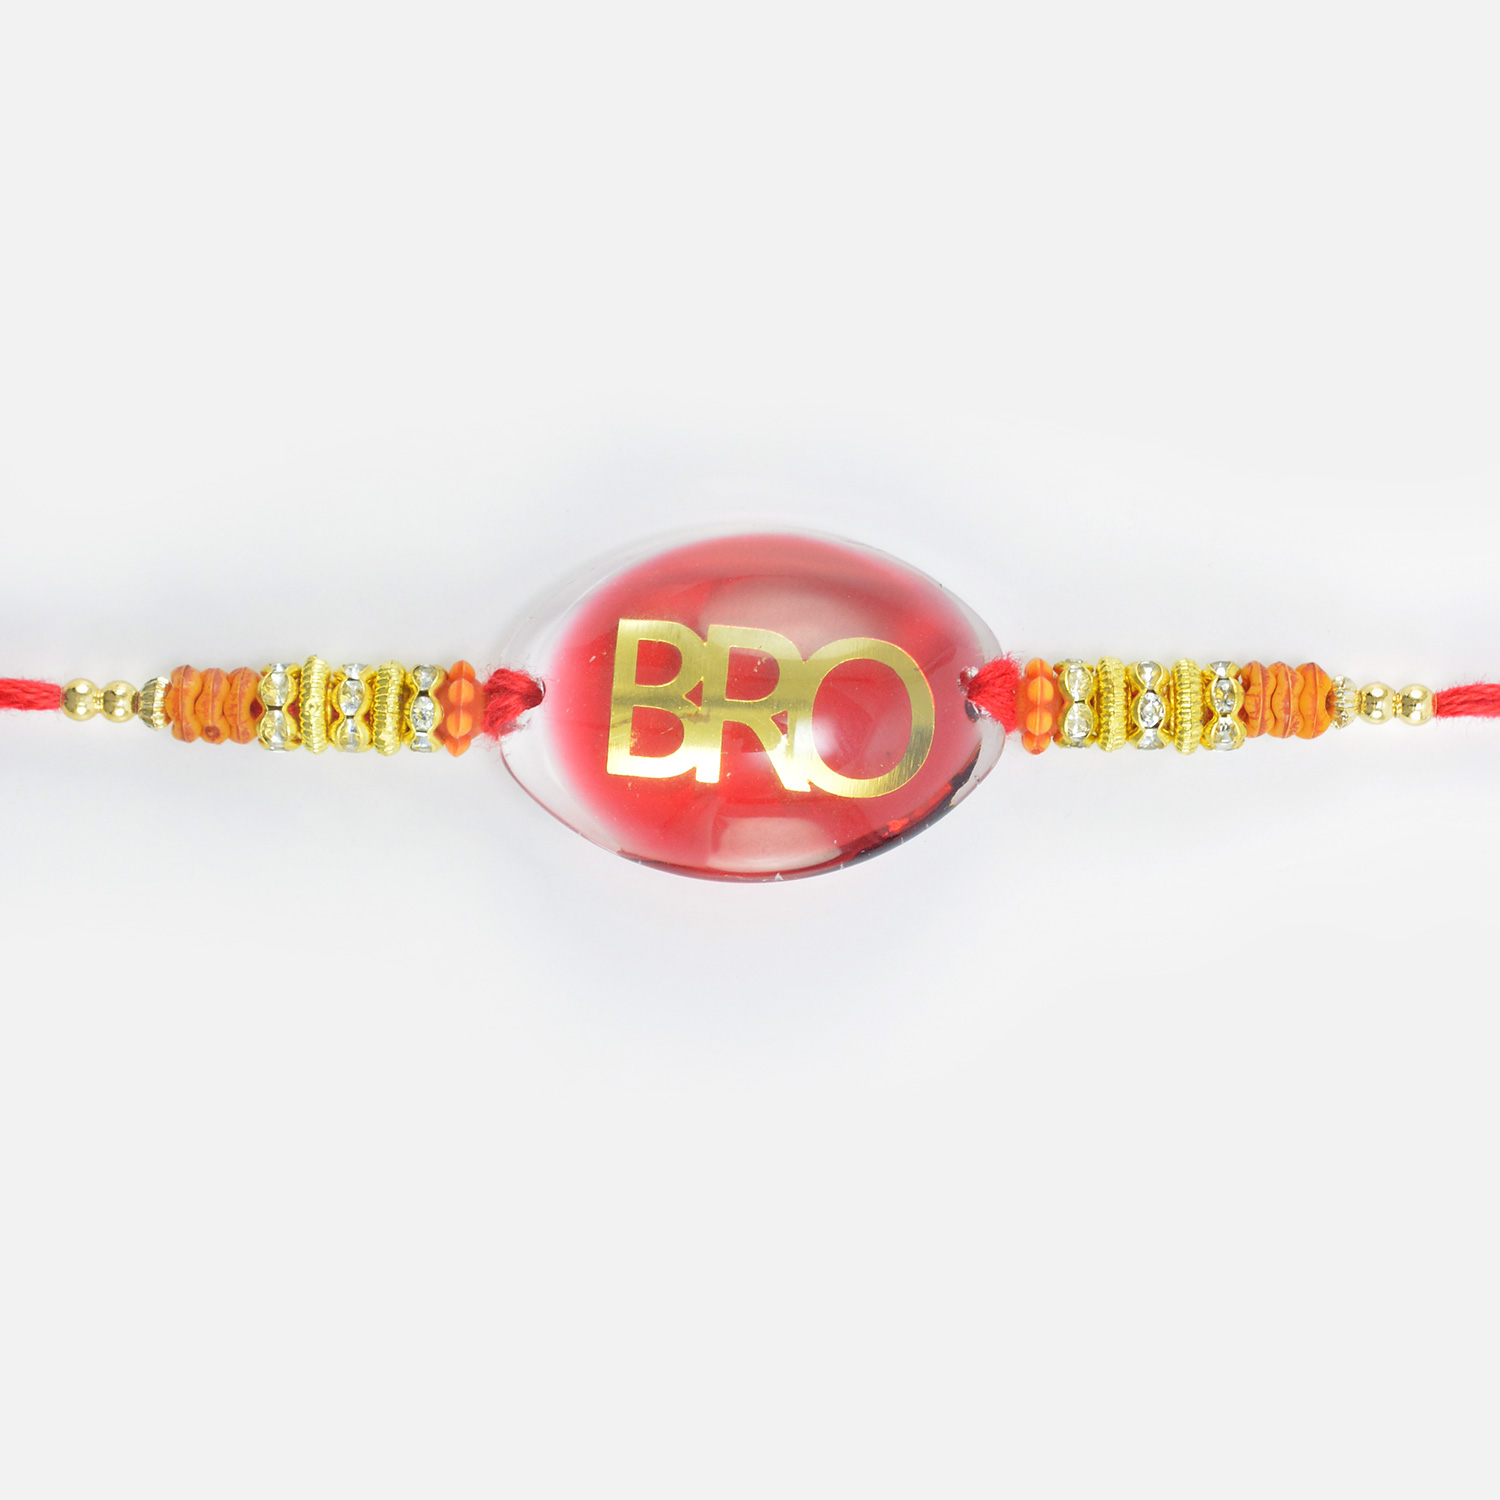 Bro Written Red Base Rakhi with Beads and Jewels in It Amazing Looking Brother Design er Rakhi